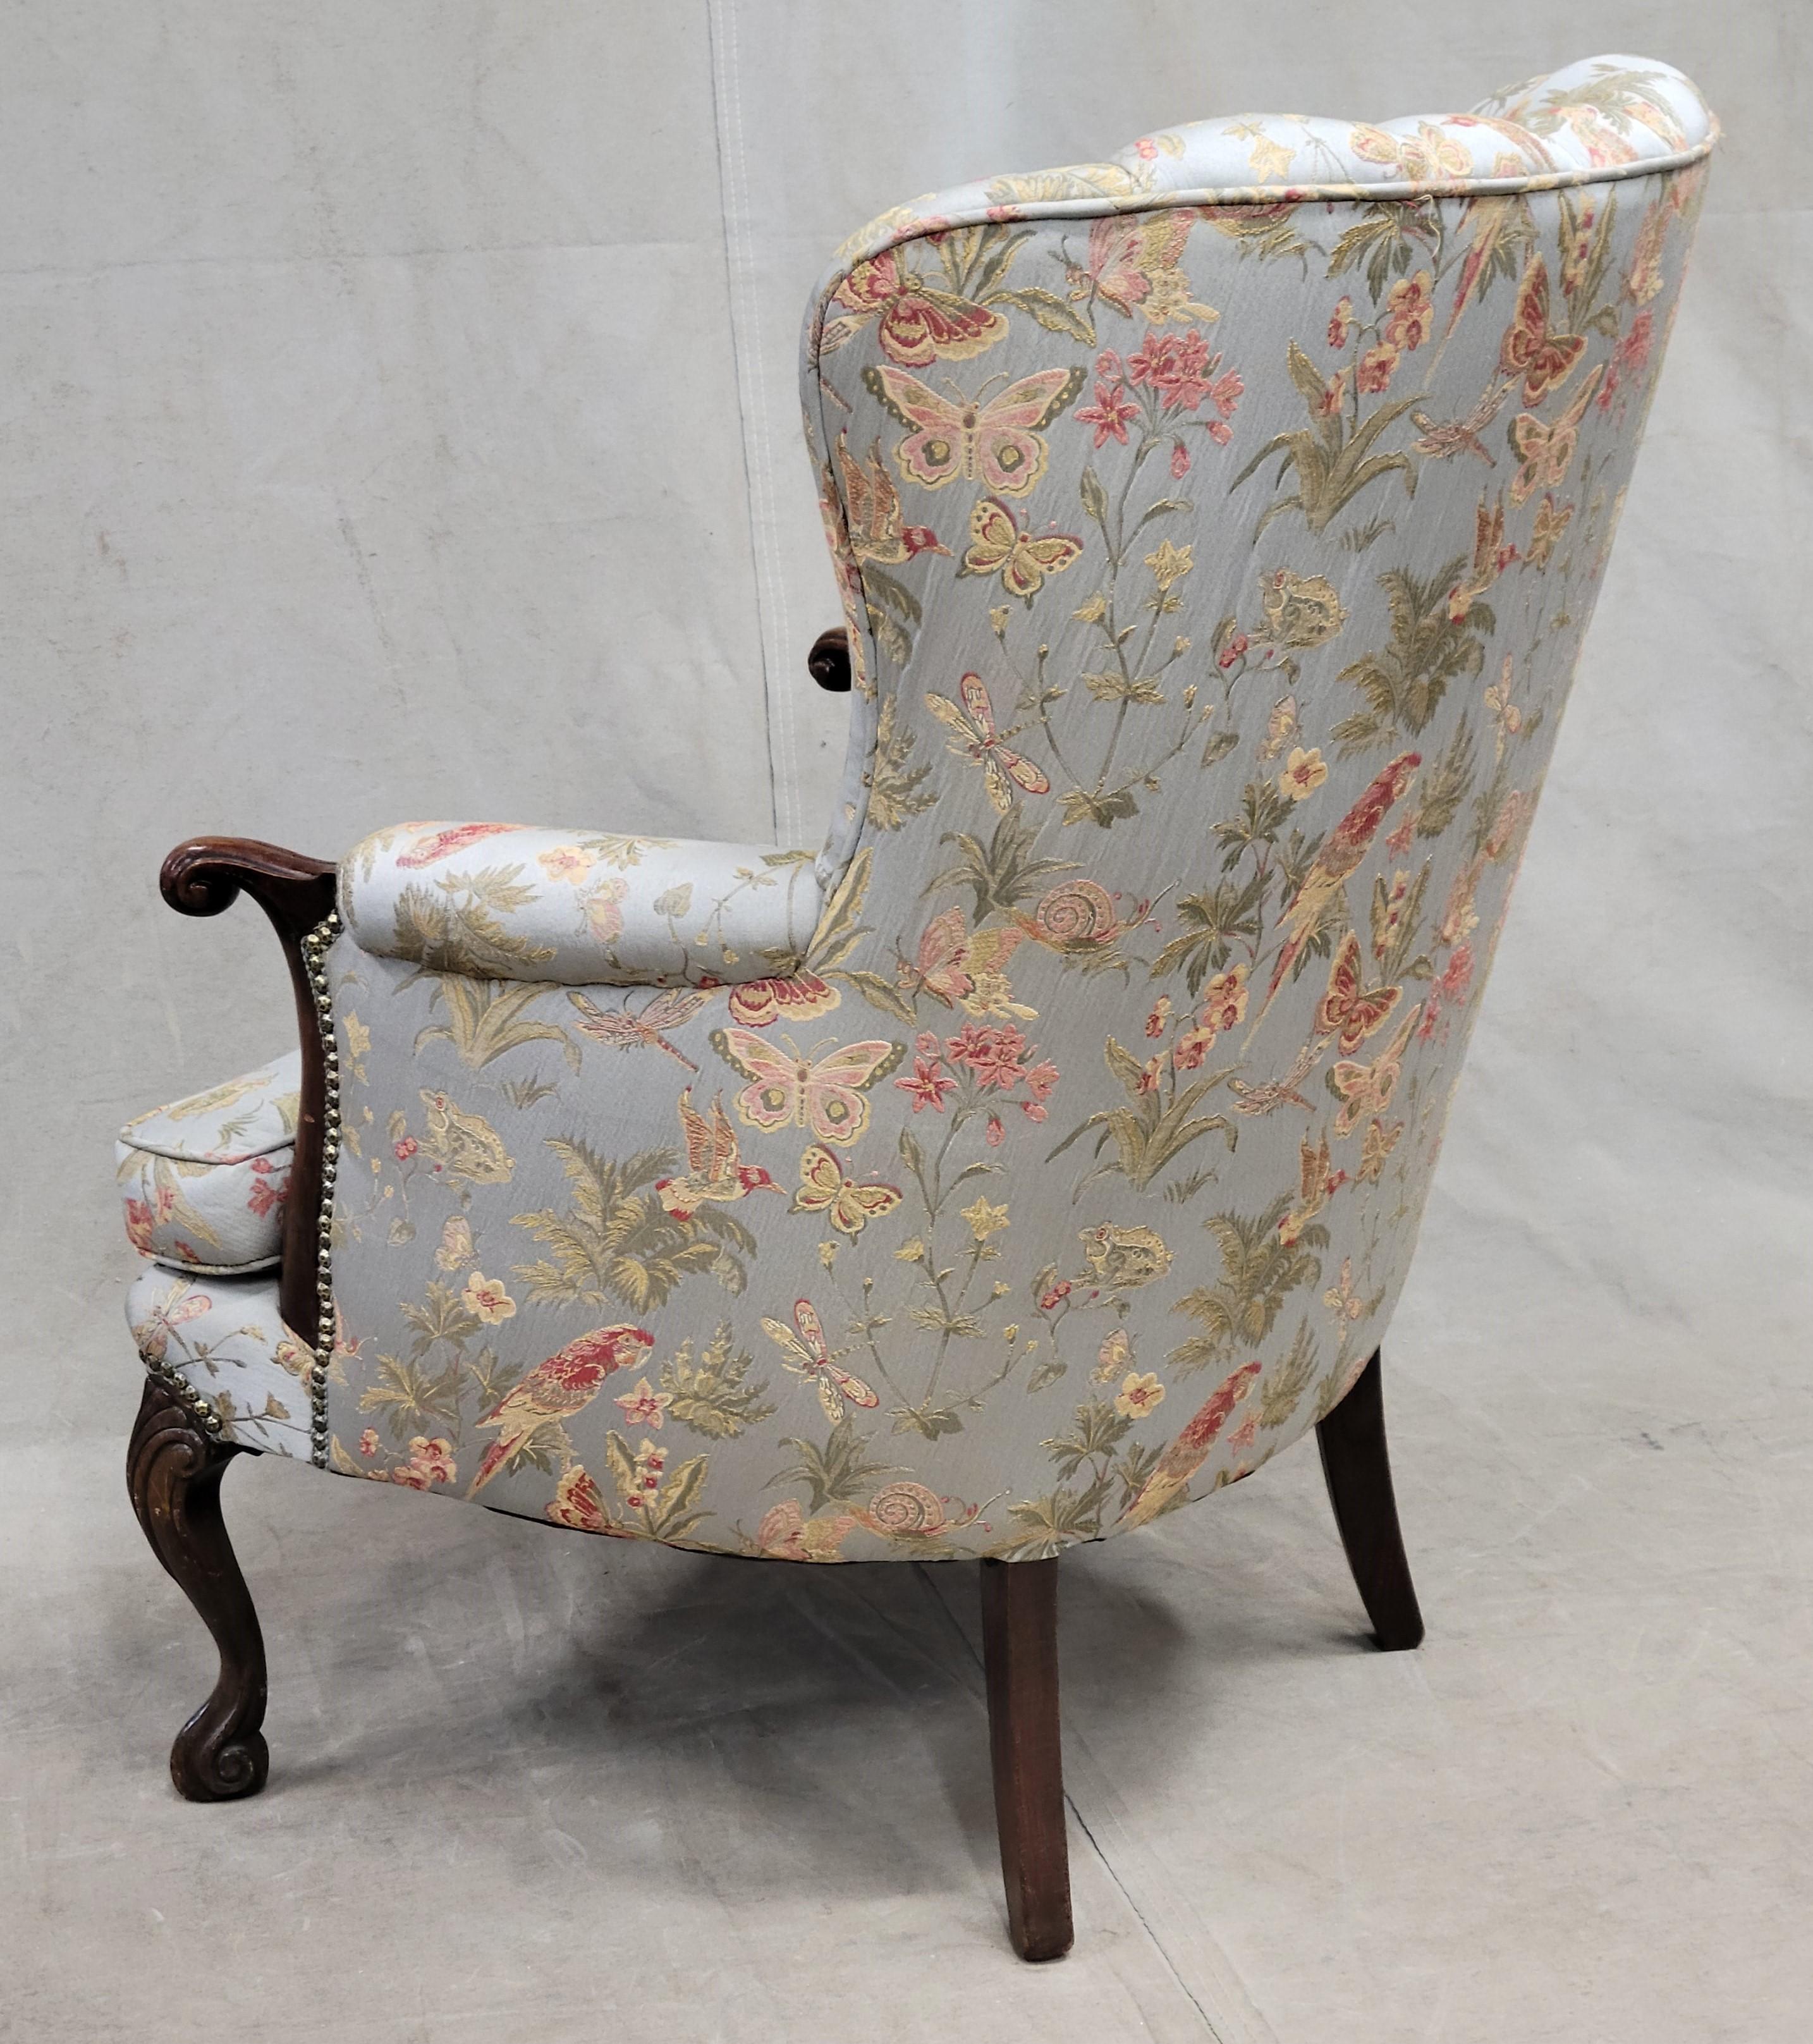 Vintage 1930s Art Deco Fan Back Armchair With Kravet Botanical Upholstery In Good Condition For Sale In Centennial, CO